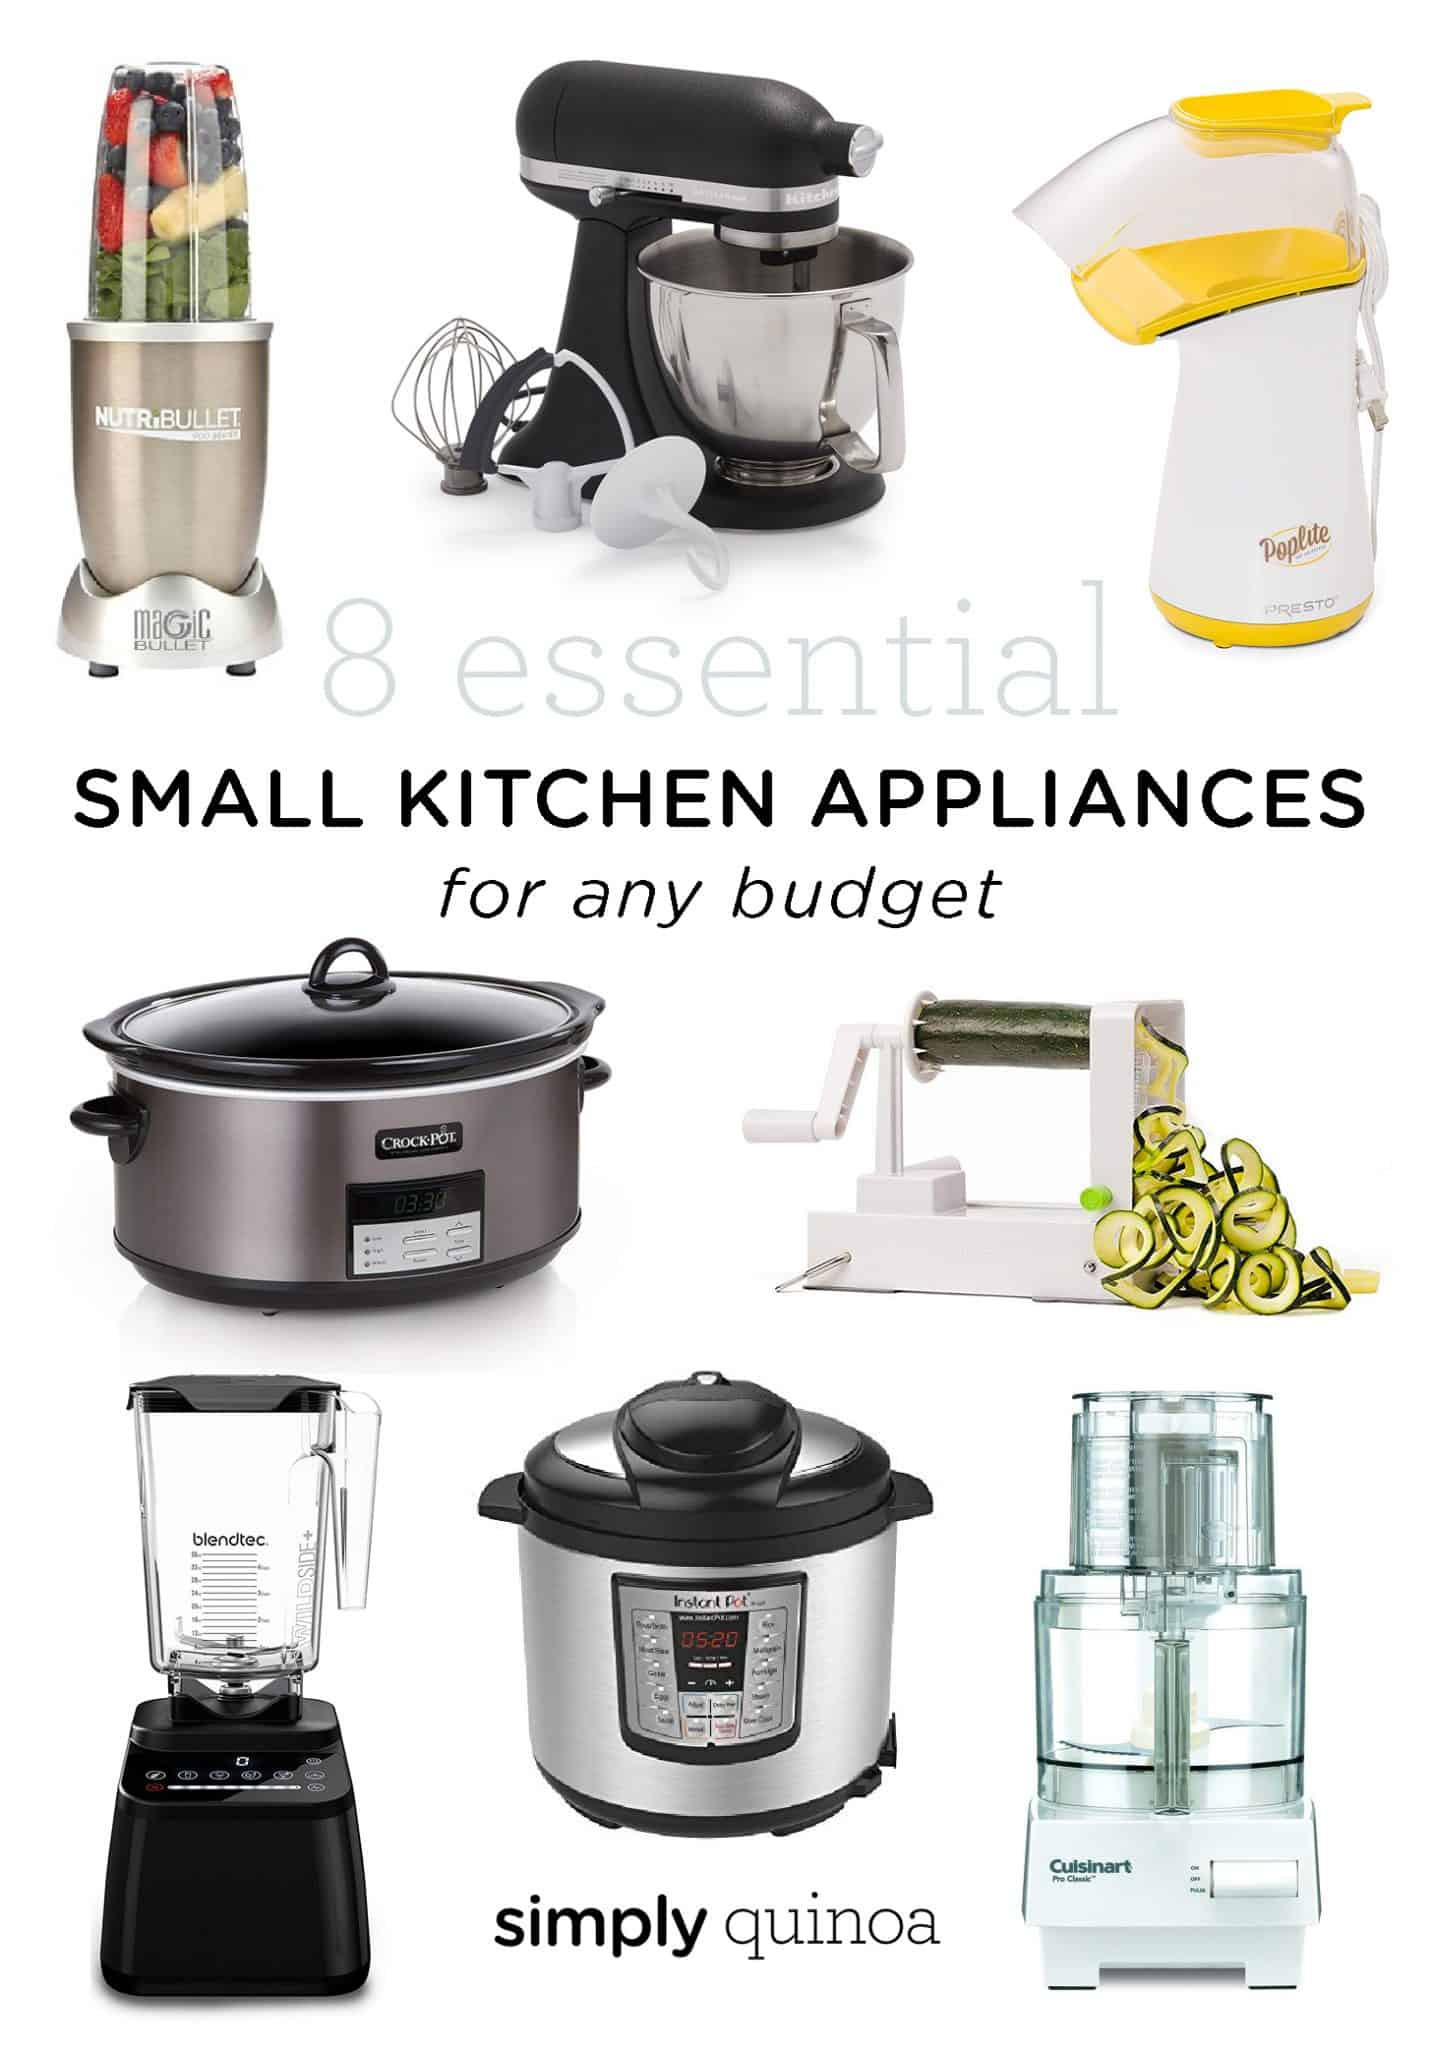 Small Kitchen Range
 8 Essential Small Kitchen Appliances for Any Bud